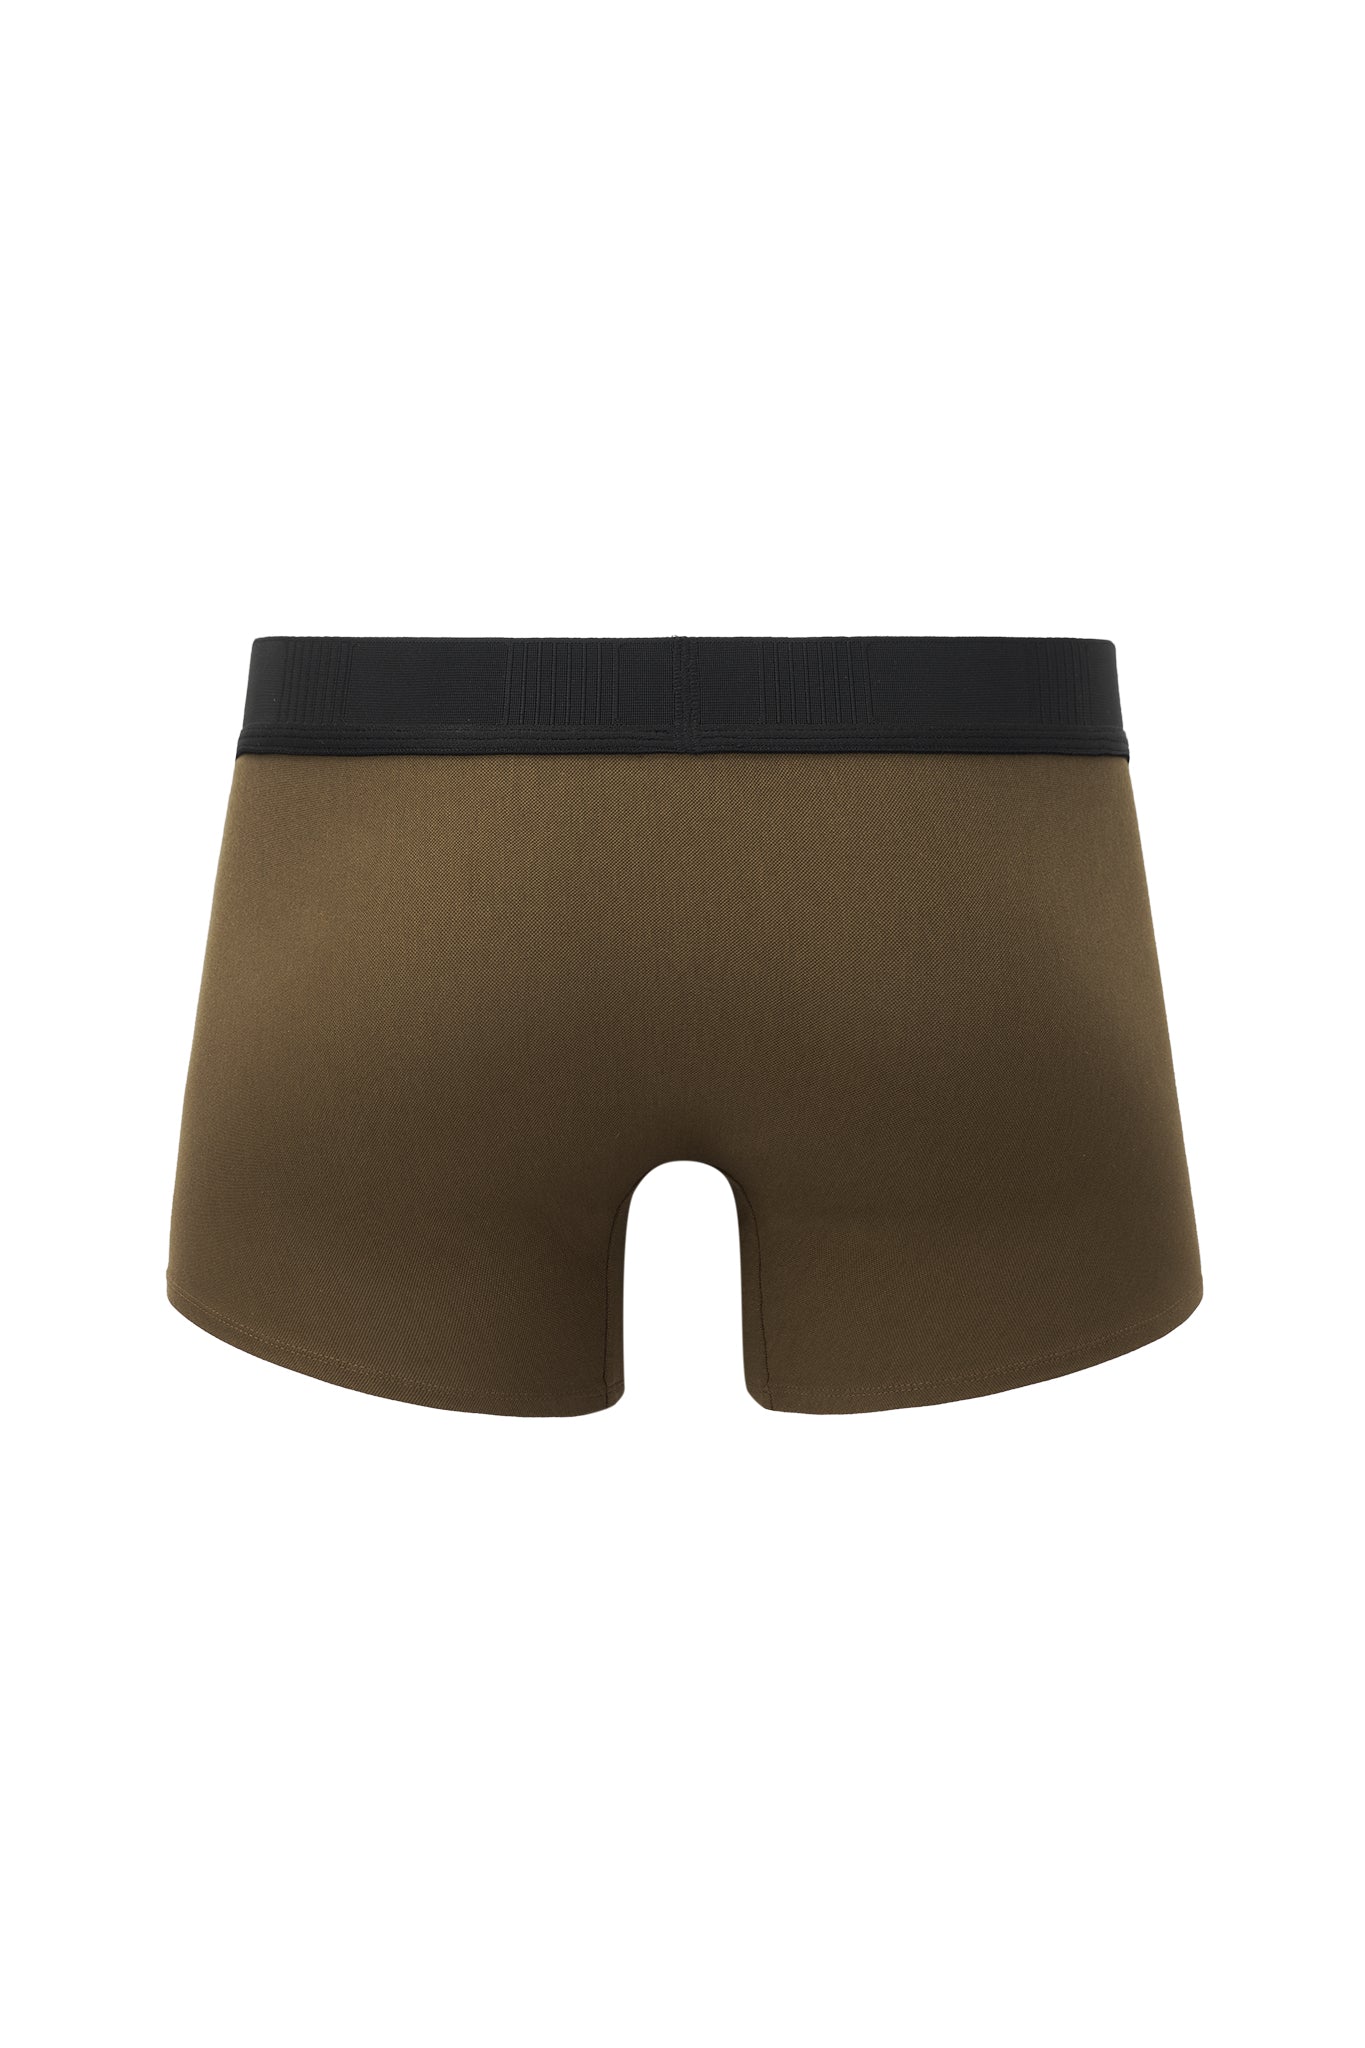 WOOD BROWN RATIONAL ROMANCE BOXER BRIEF